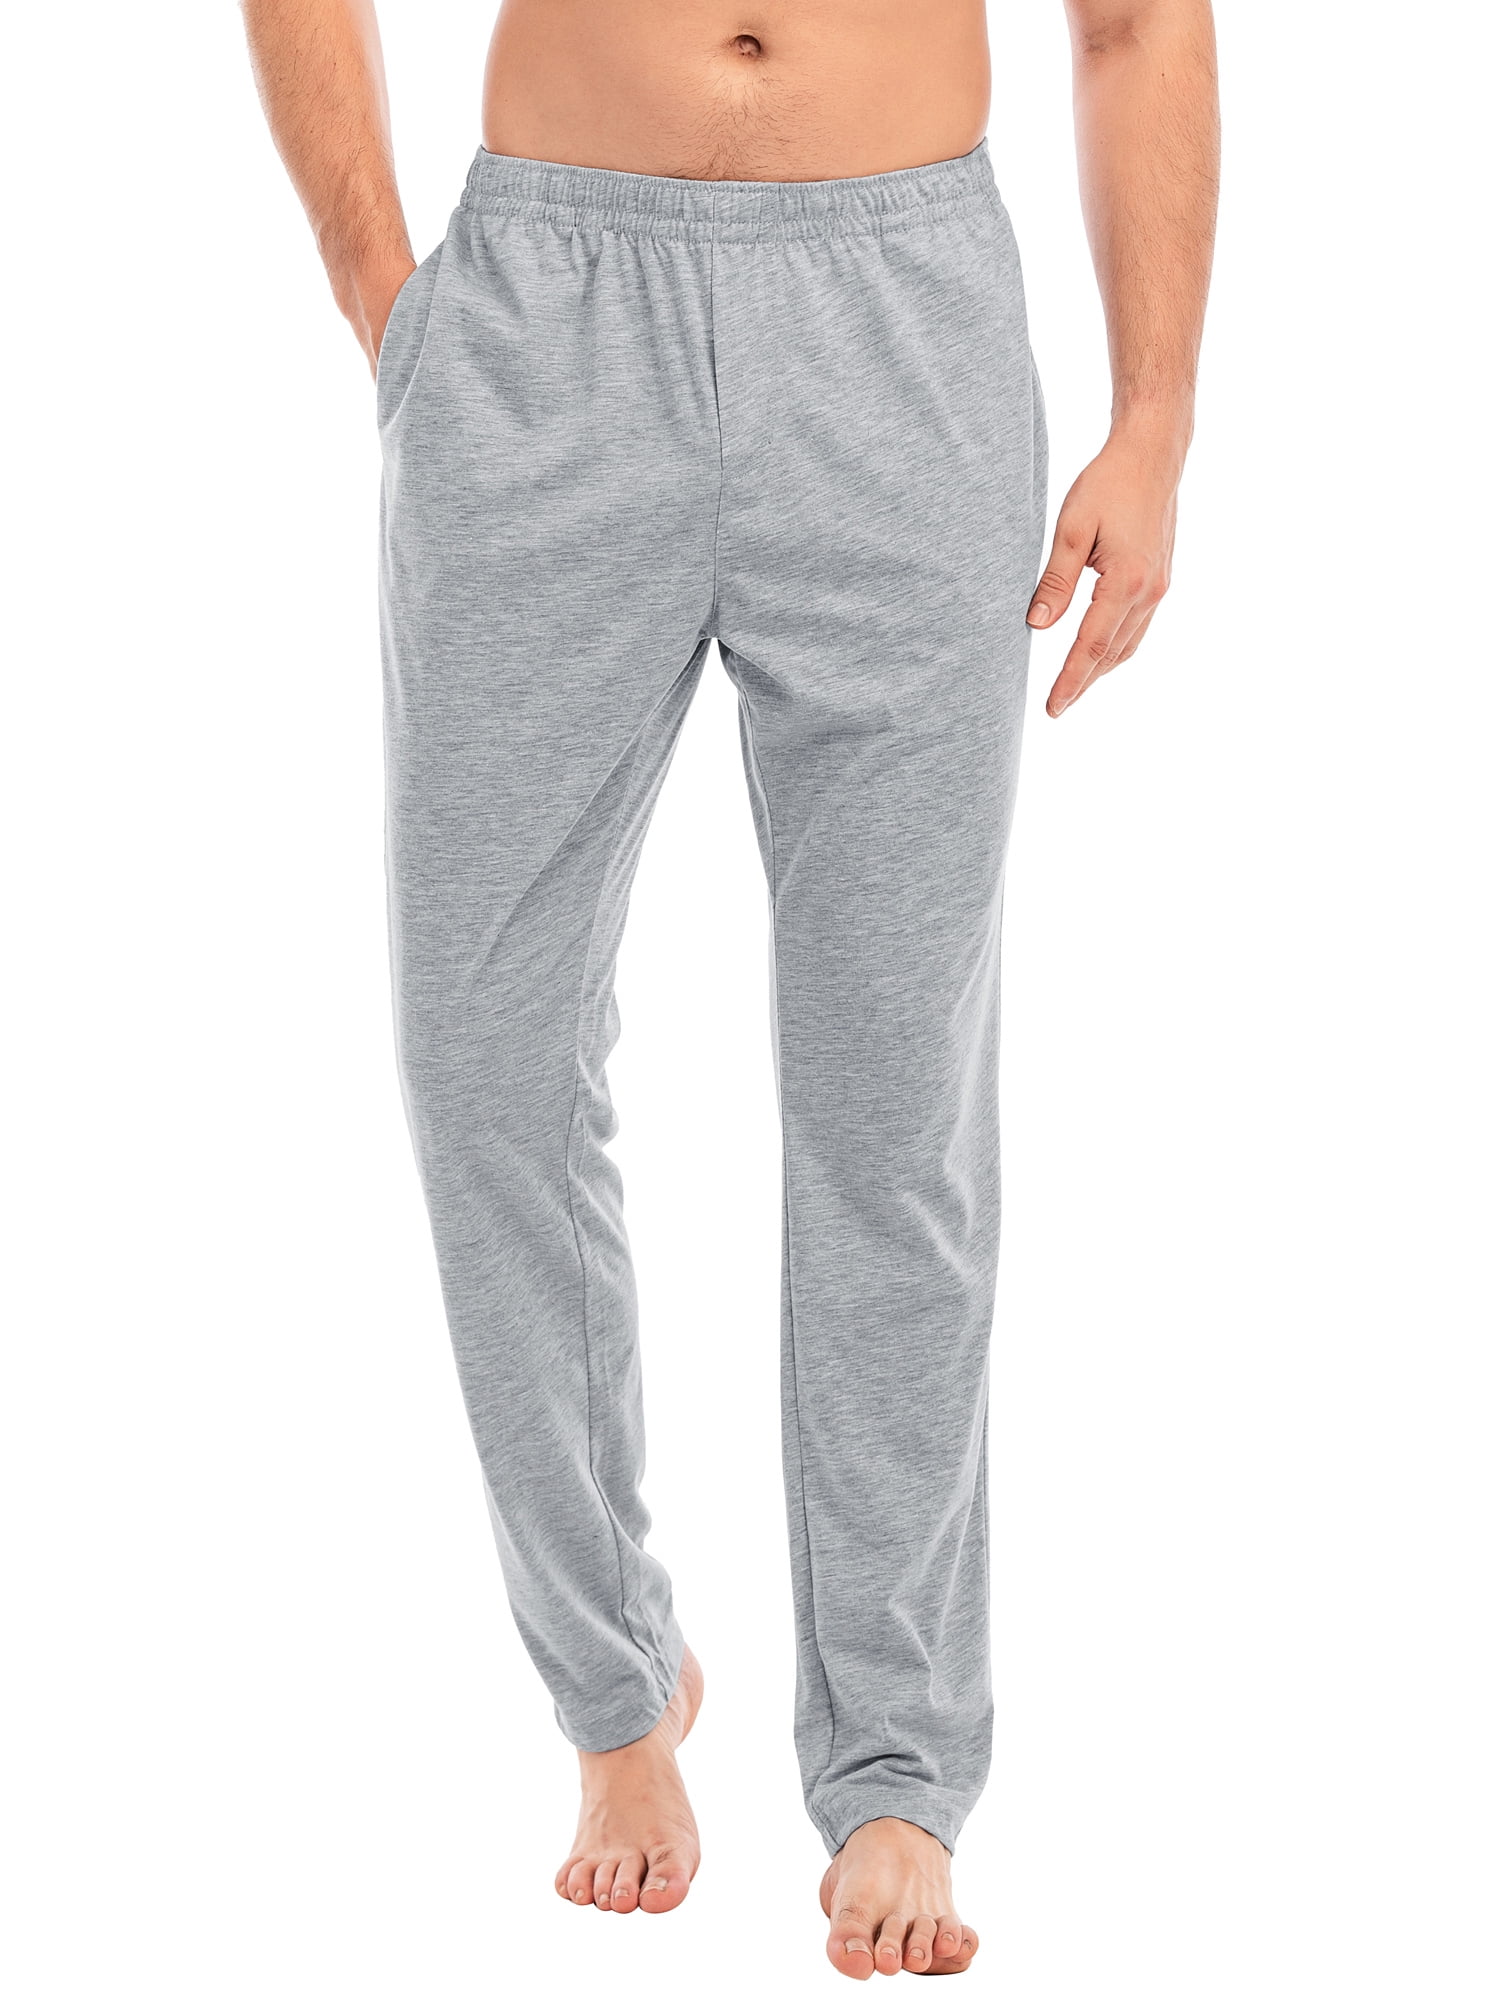 A-OnE Men's Cotton Pajama / full elastic with naraa